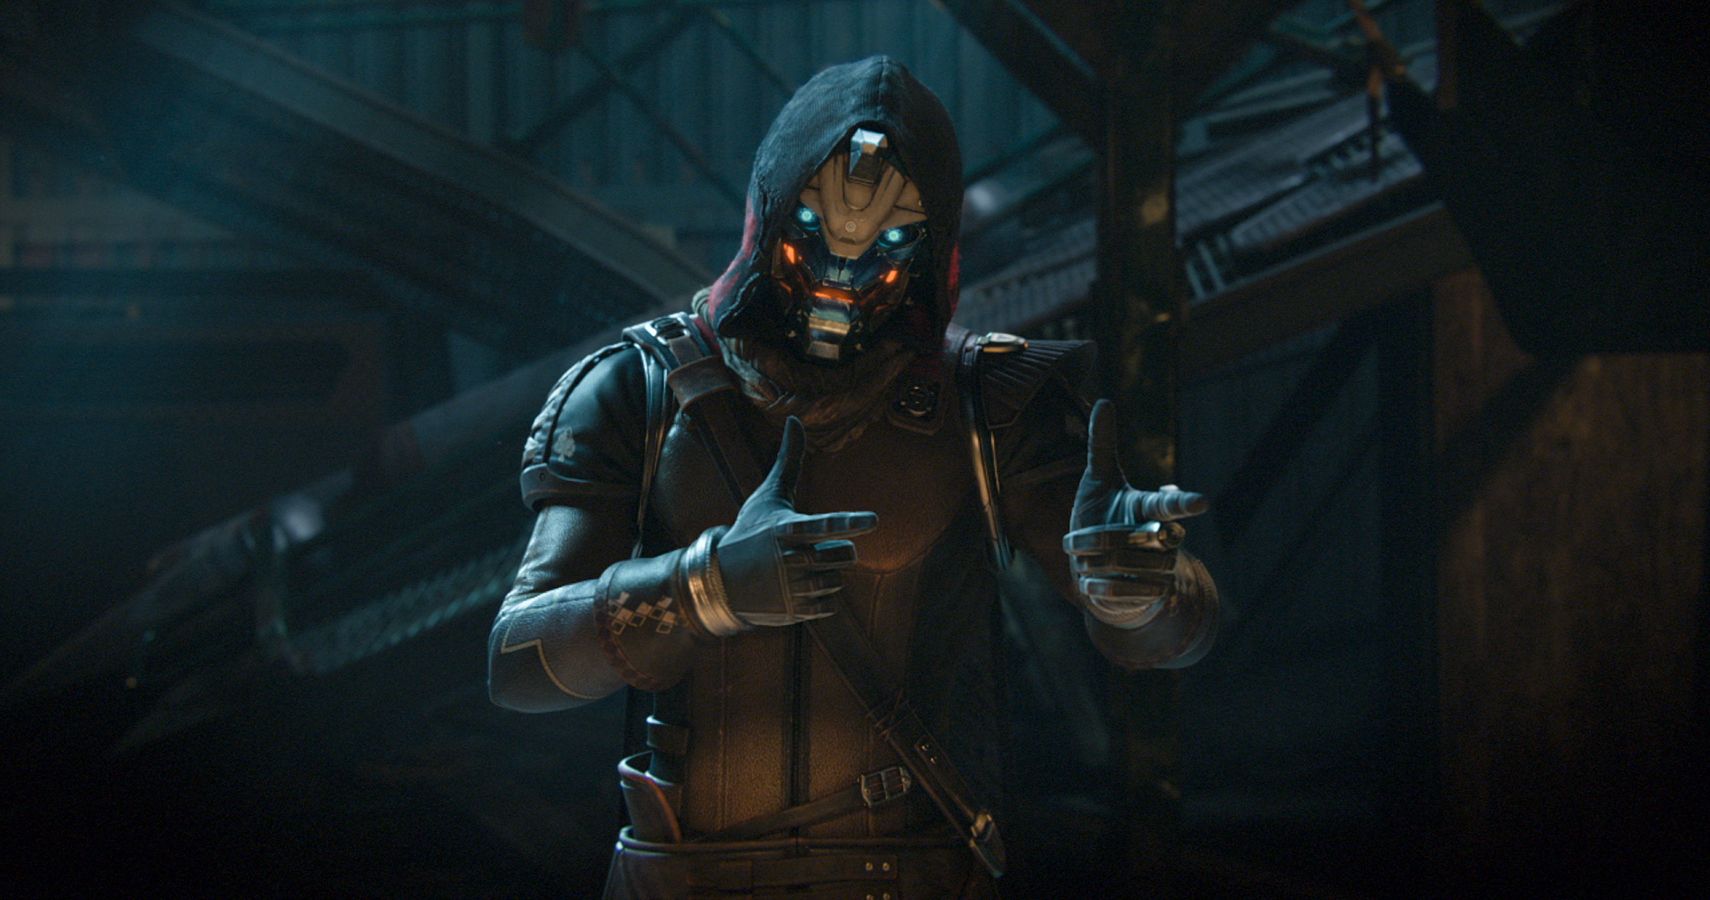 10 Facts You Didn't Know About Cayde-6 In Destiny 2